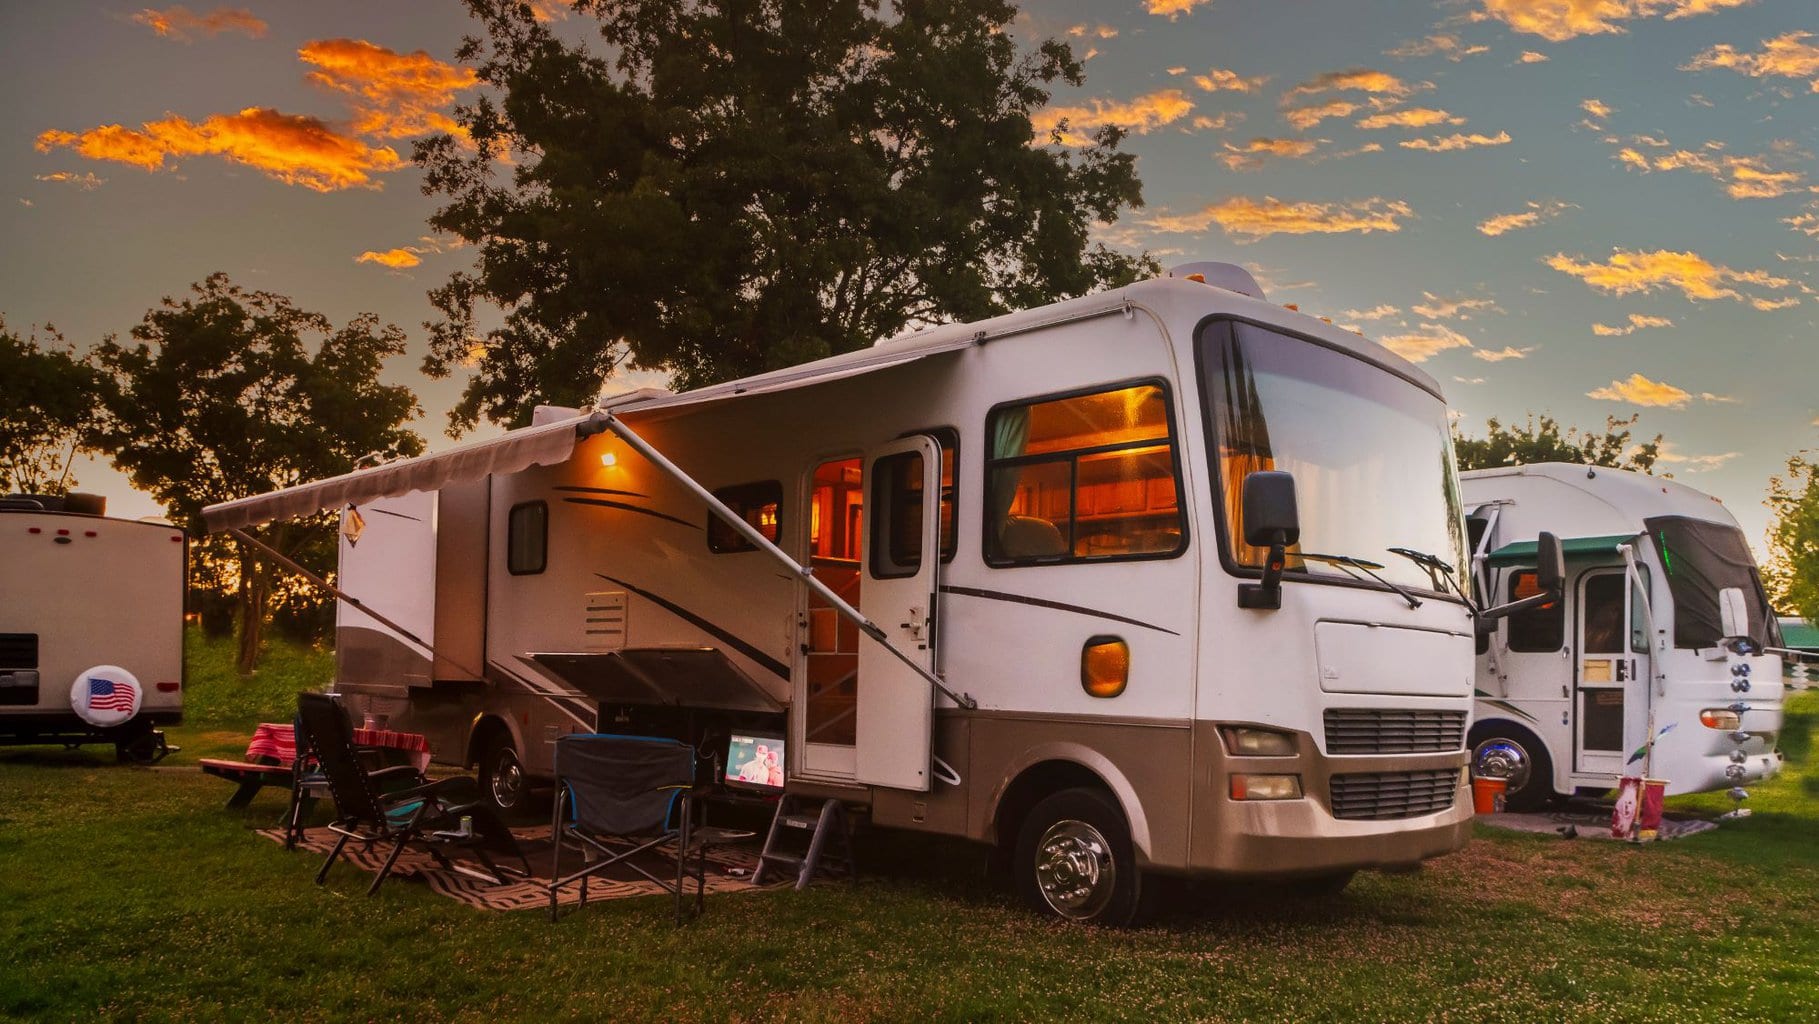 Motorhome Hire For The Family: What To Expect When Renting One